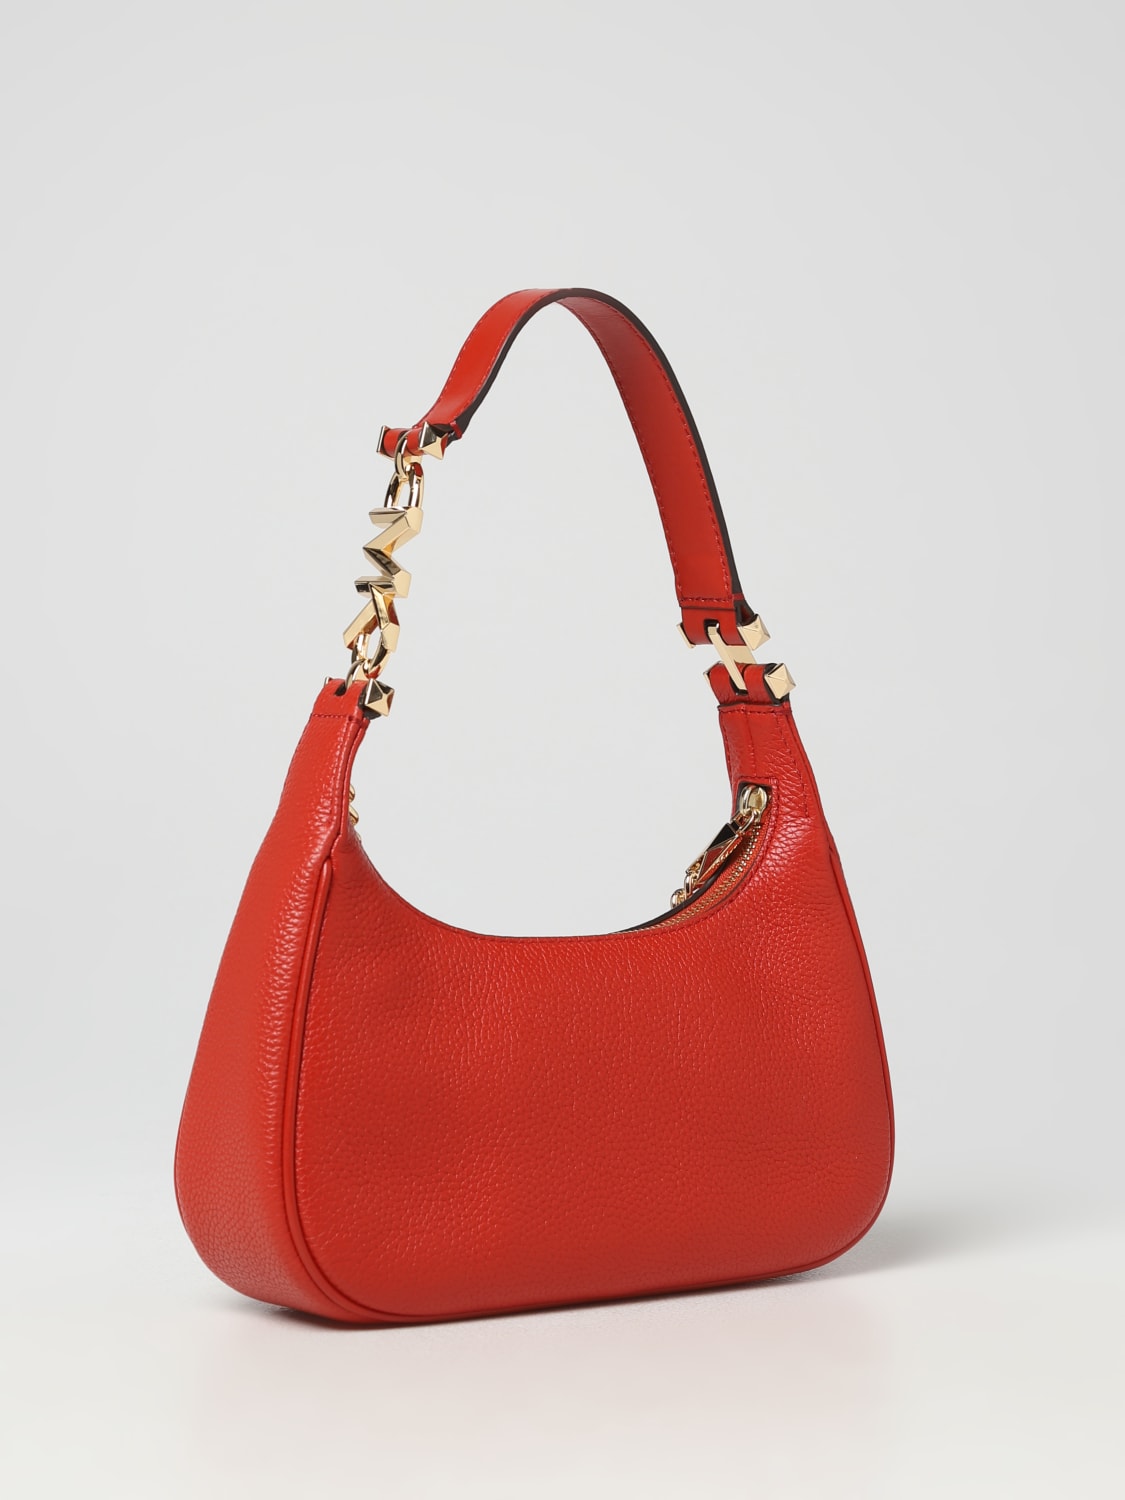 Clay Leather Top-handle Bag